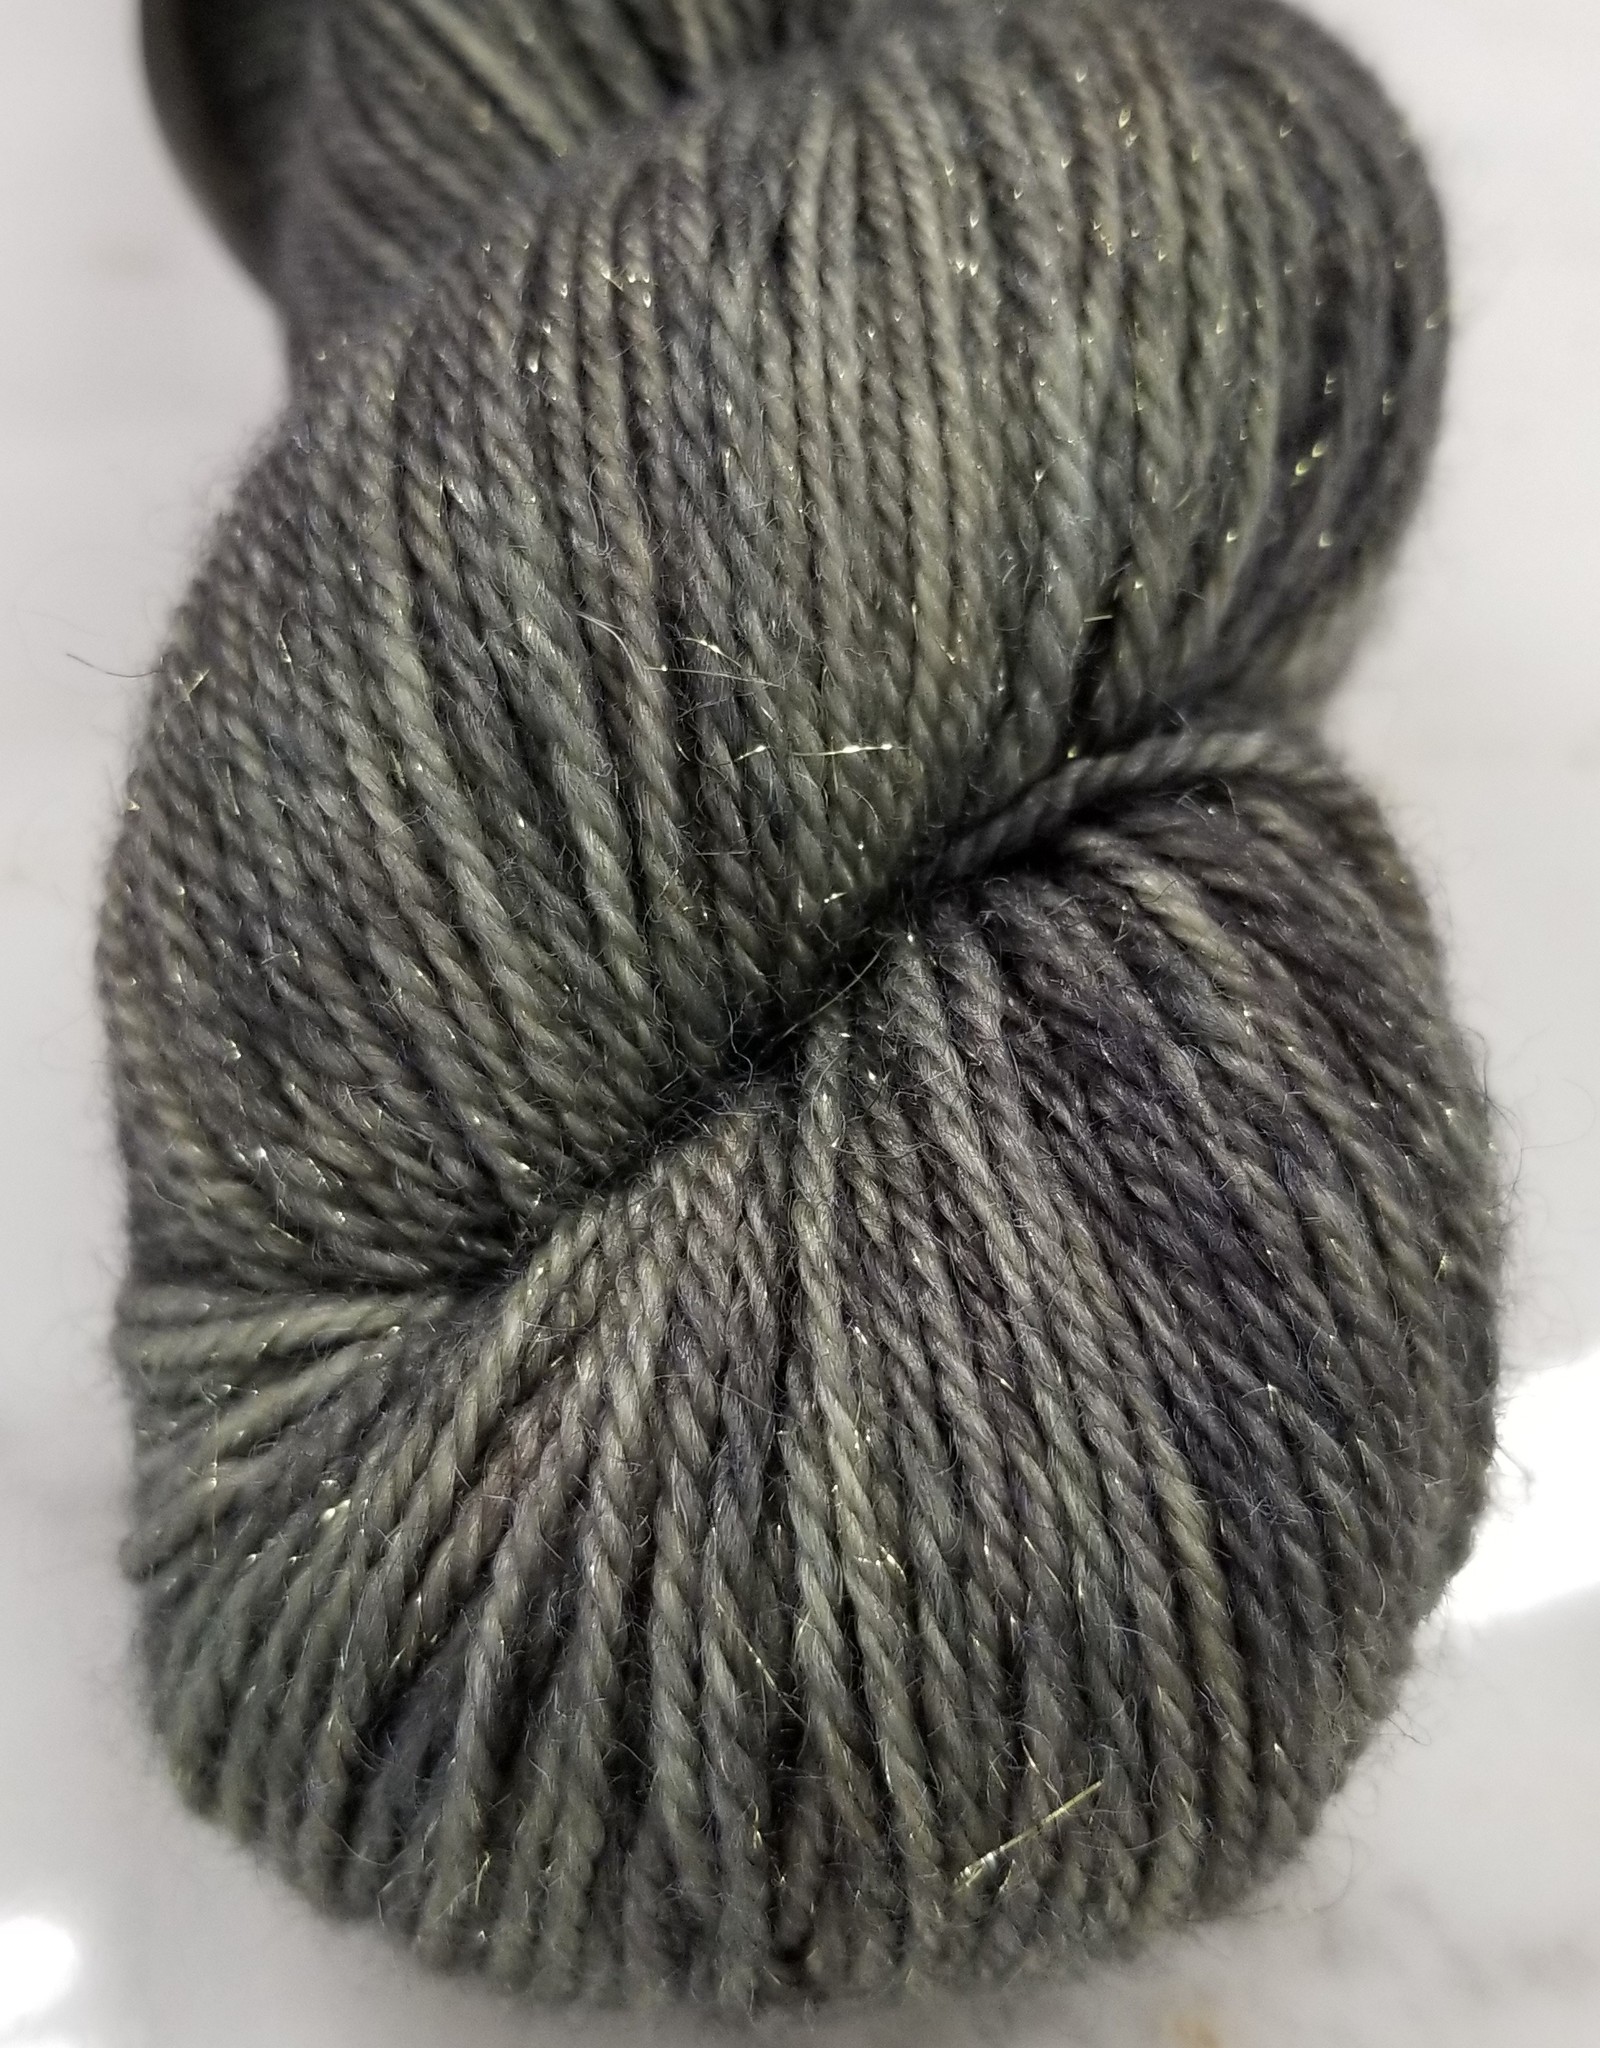 Wool Interrupted Silky Sparkly Leicester